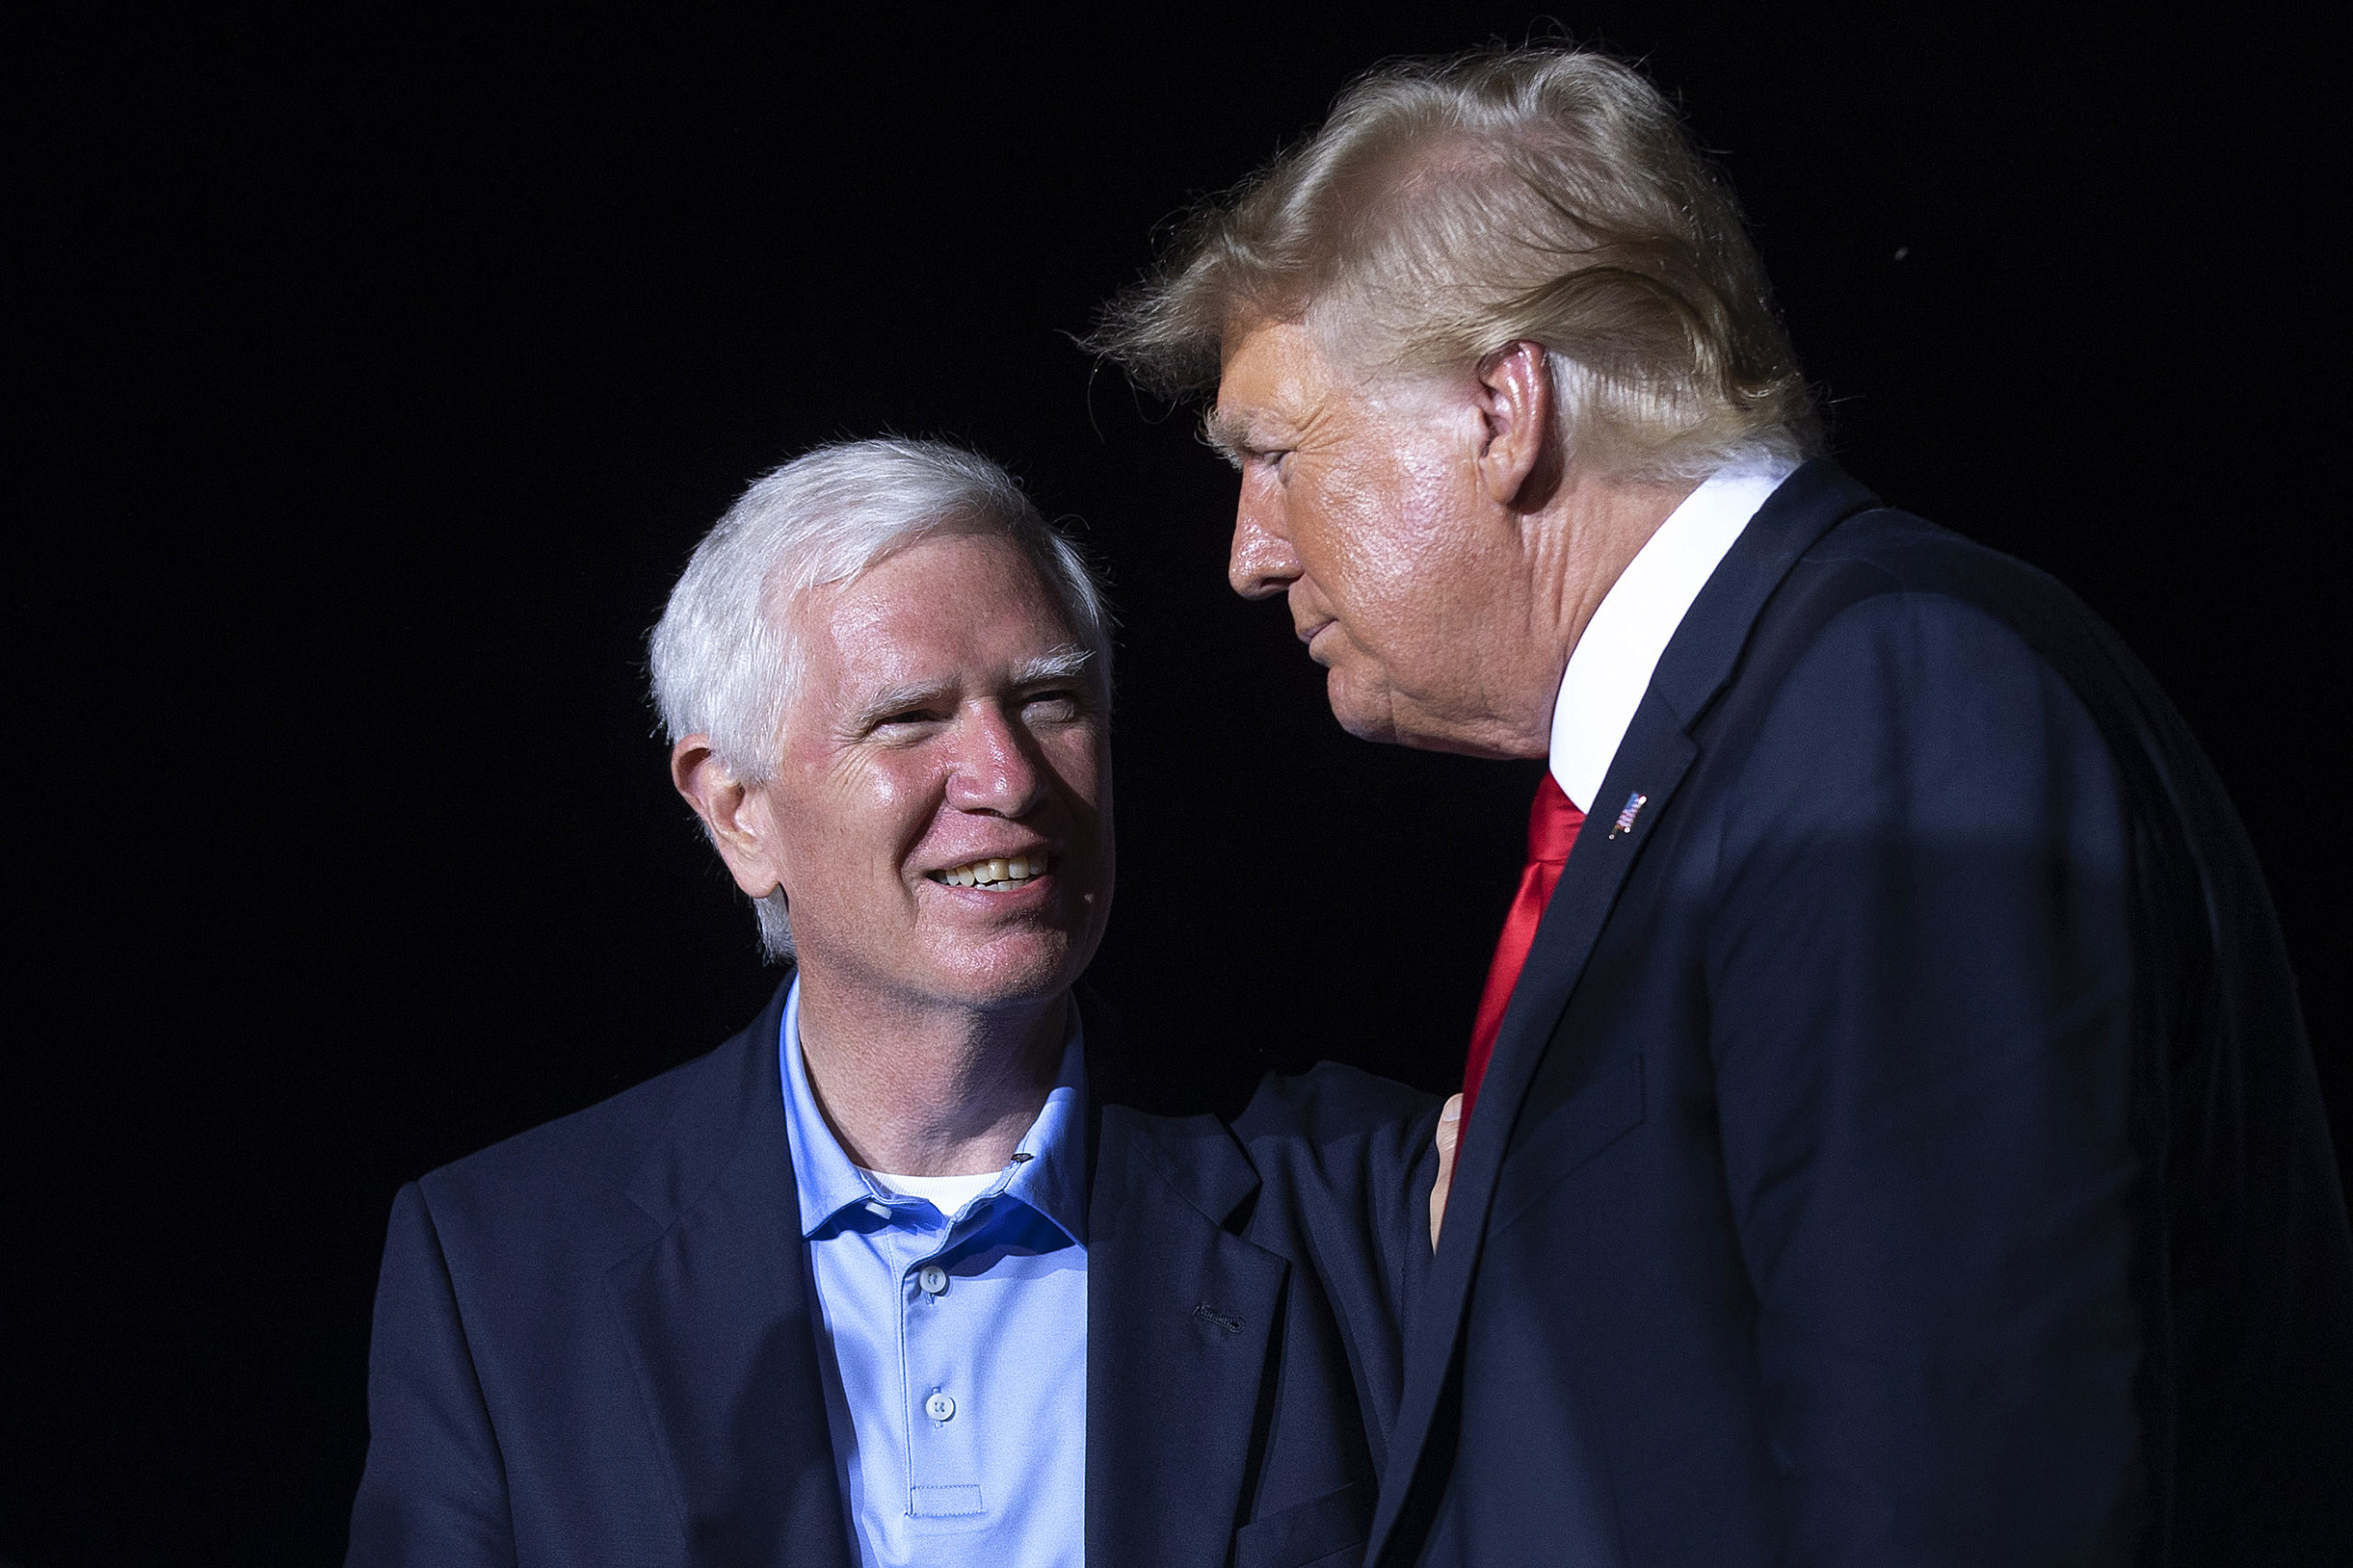 CULLMAN, ALABAMA - AUGUST 21: Former U.S. President Donald Trump (R) welcomes candidate for U.S. Senate and U.S. Rep. Mo Brooks (R-AL) to the stage during a "Save America" rally at York Family Farms on August 21, 2021 in Cullman, Alabama. (Photo by Chip Somodevilla/Getty Images)